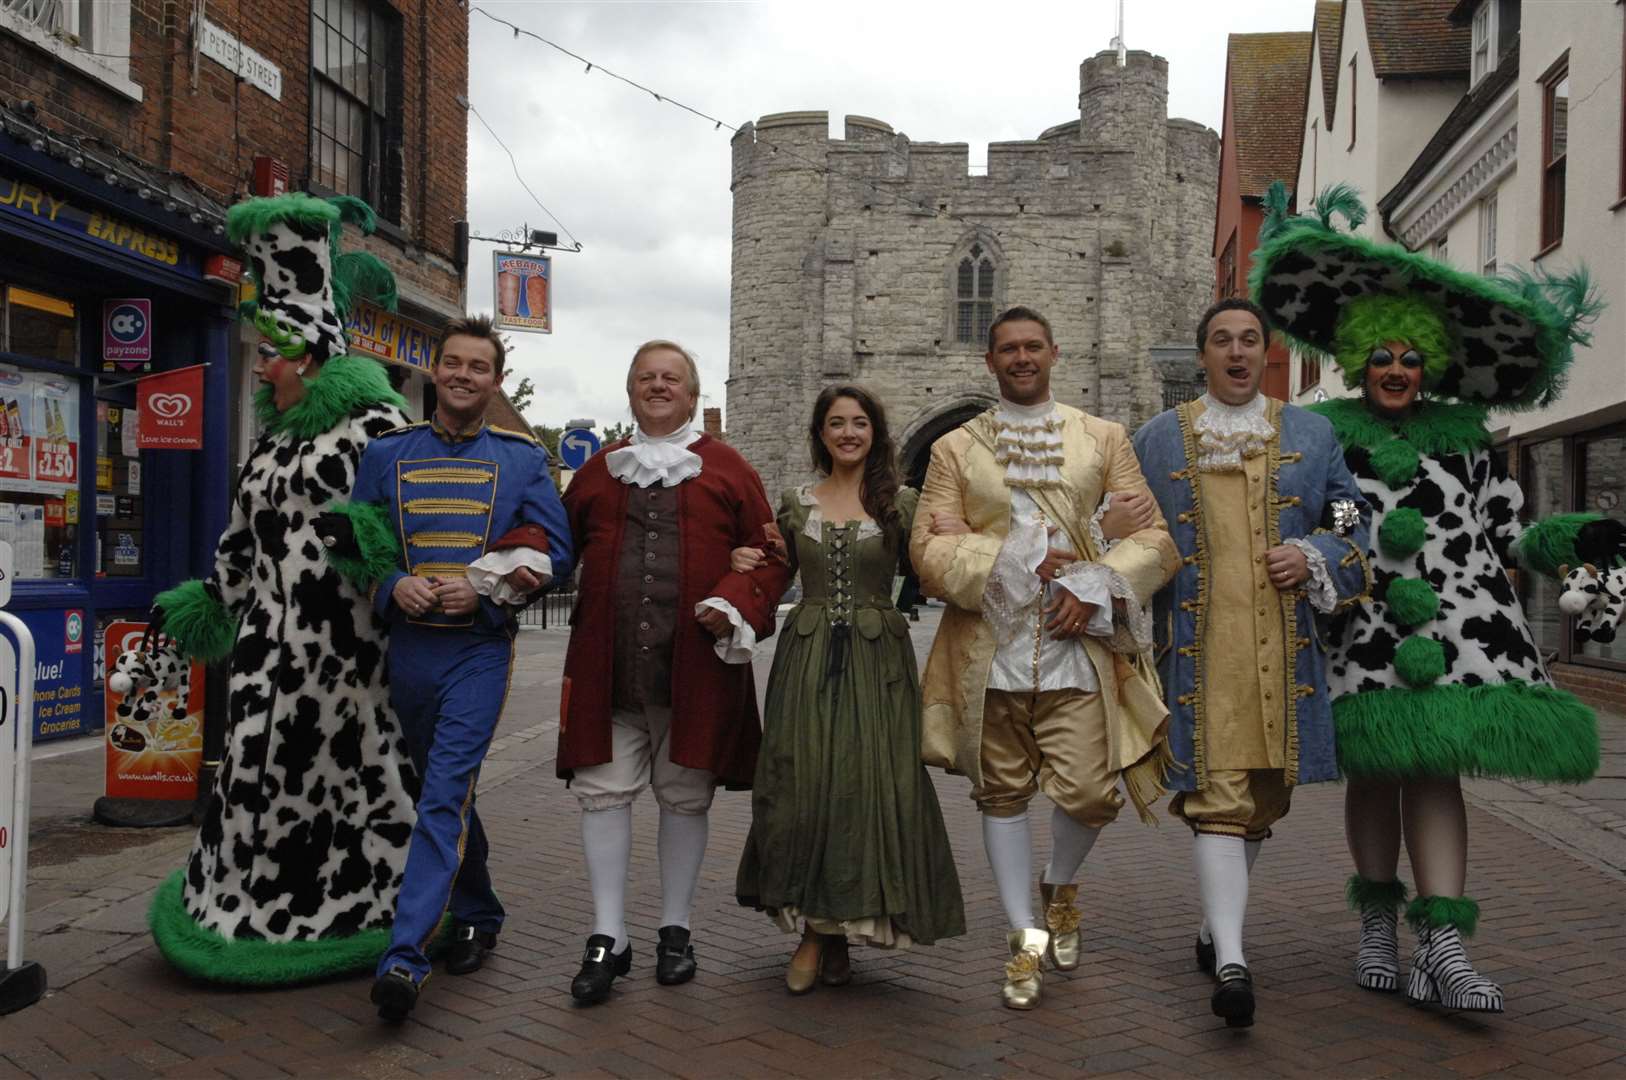 Stars of the first ever panto at the new Marlowe - it would sadly be the legendary Dave Lee's last